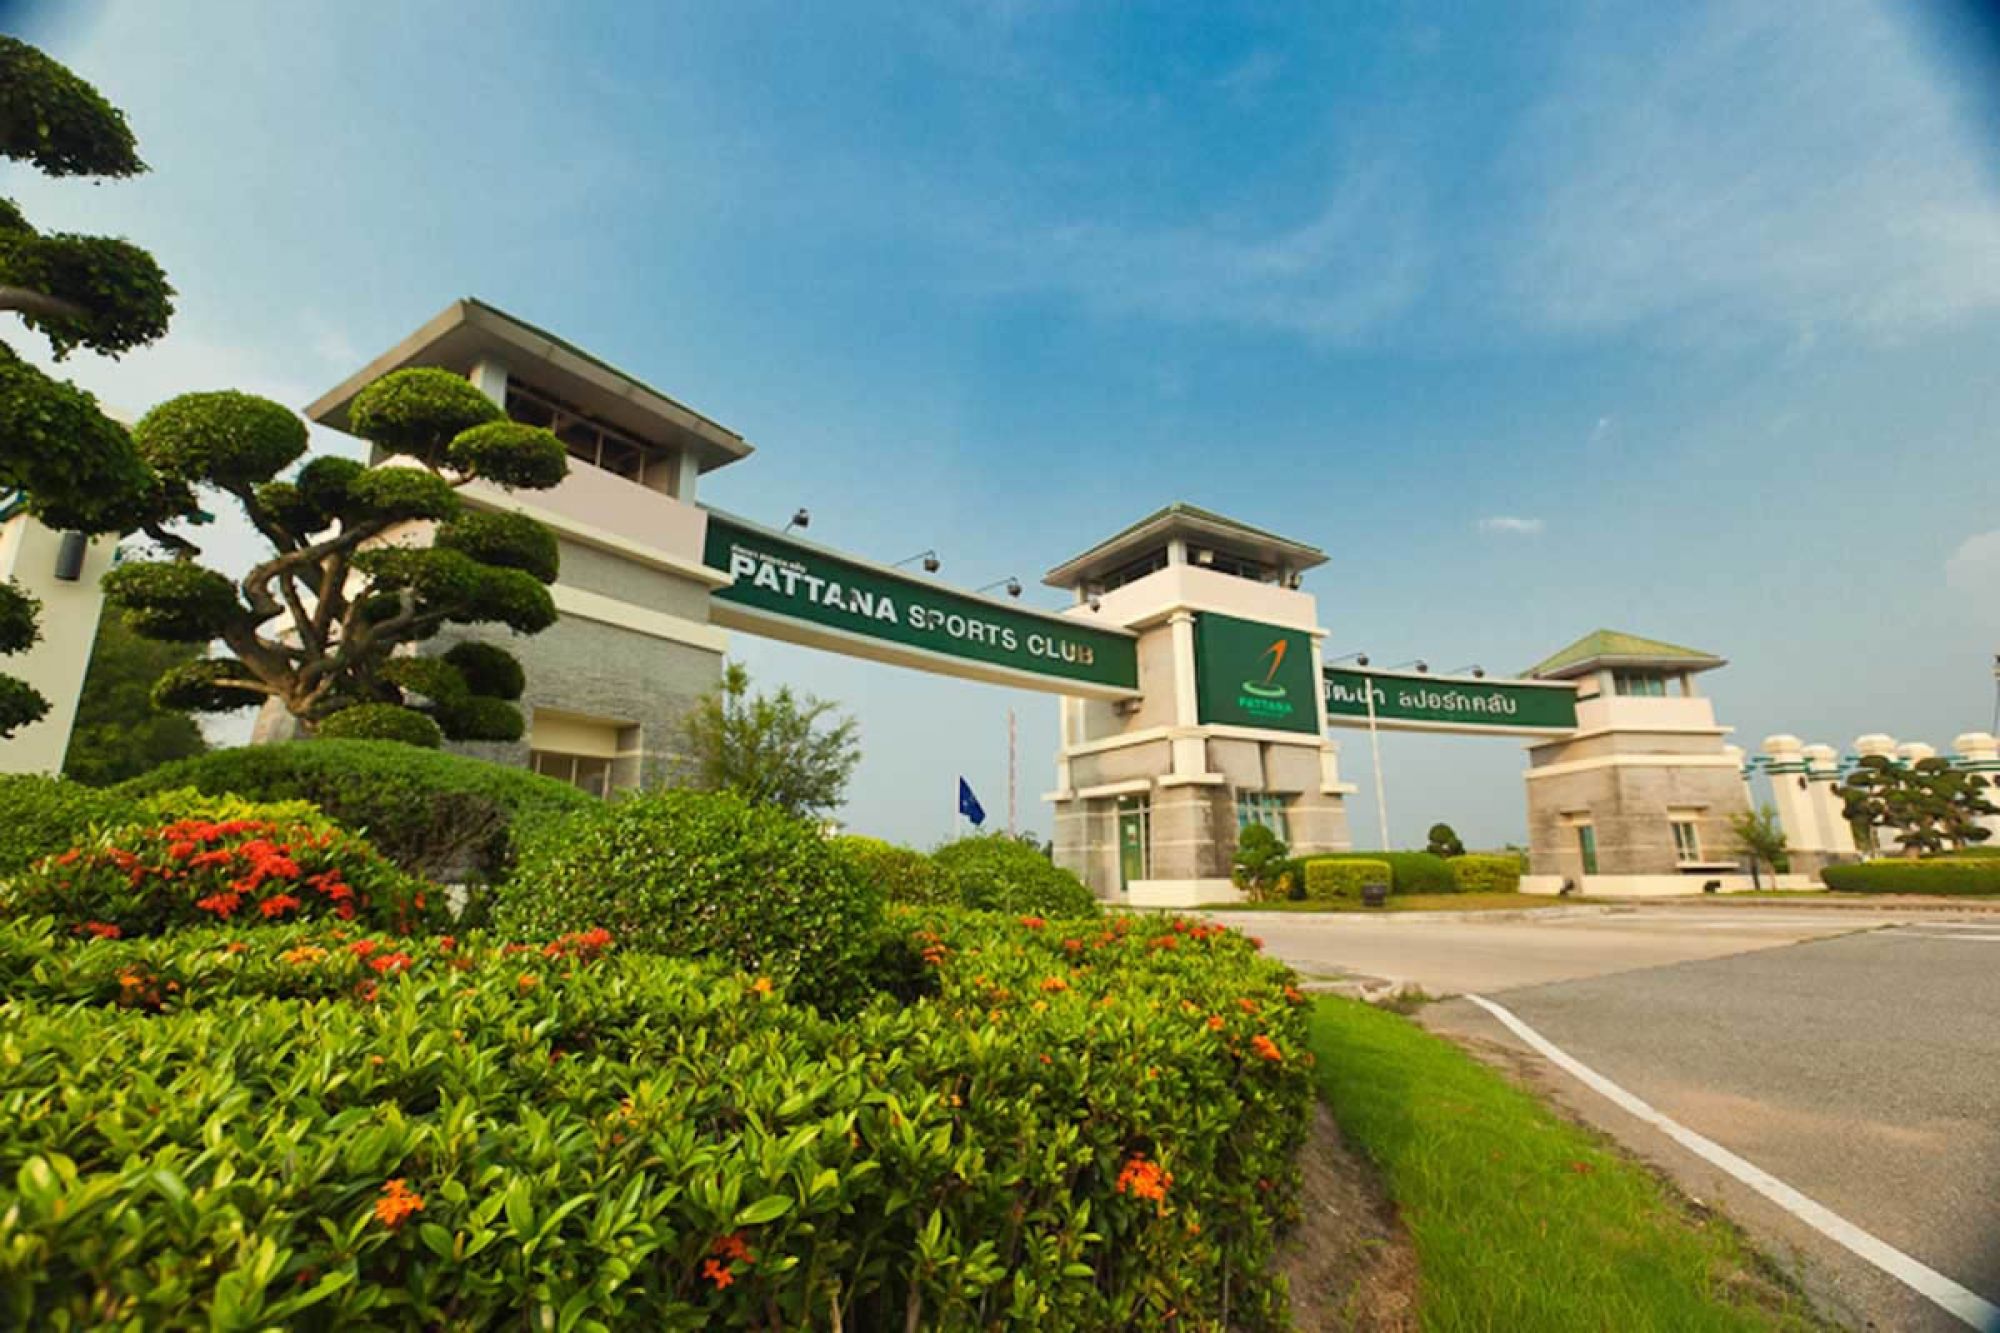 All The Pattana Sports Club's impressive golf course situated in breathtaking Pattaya.